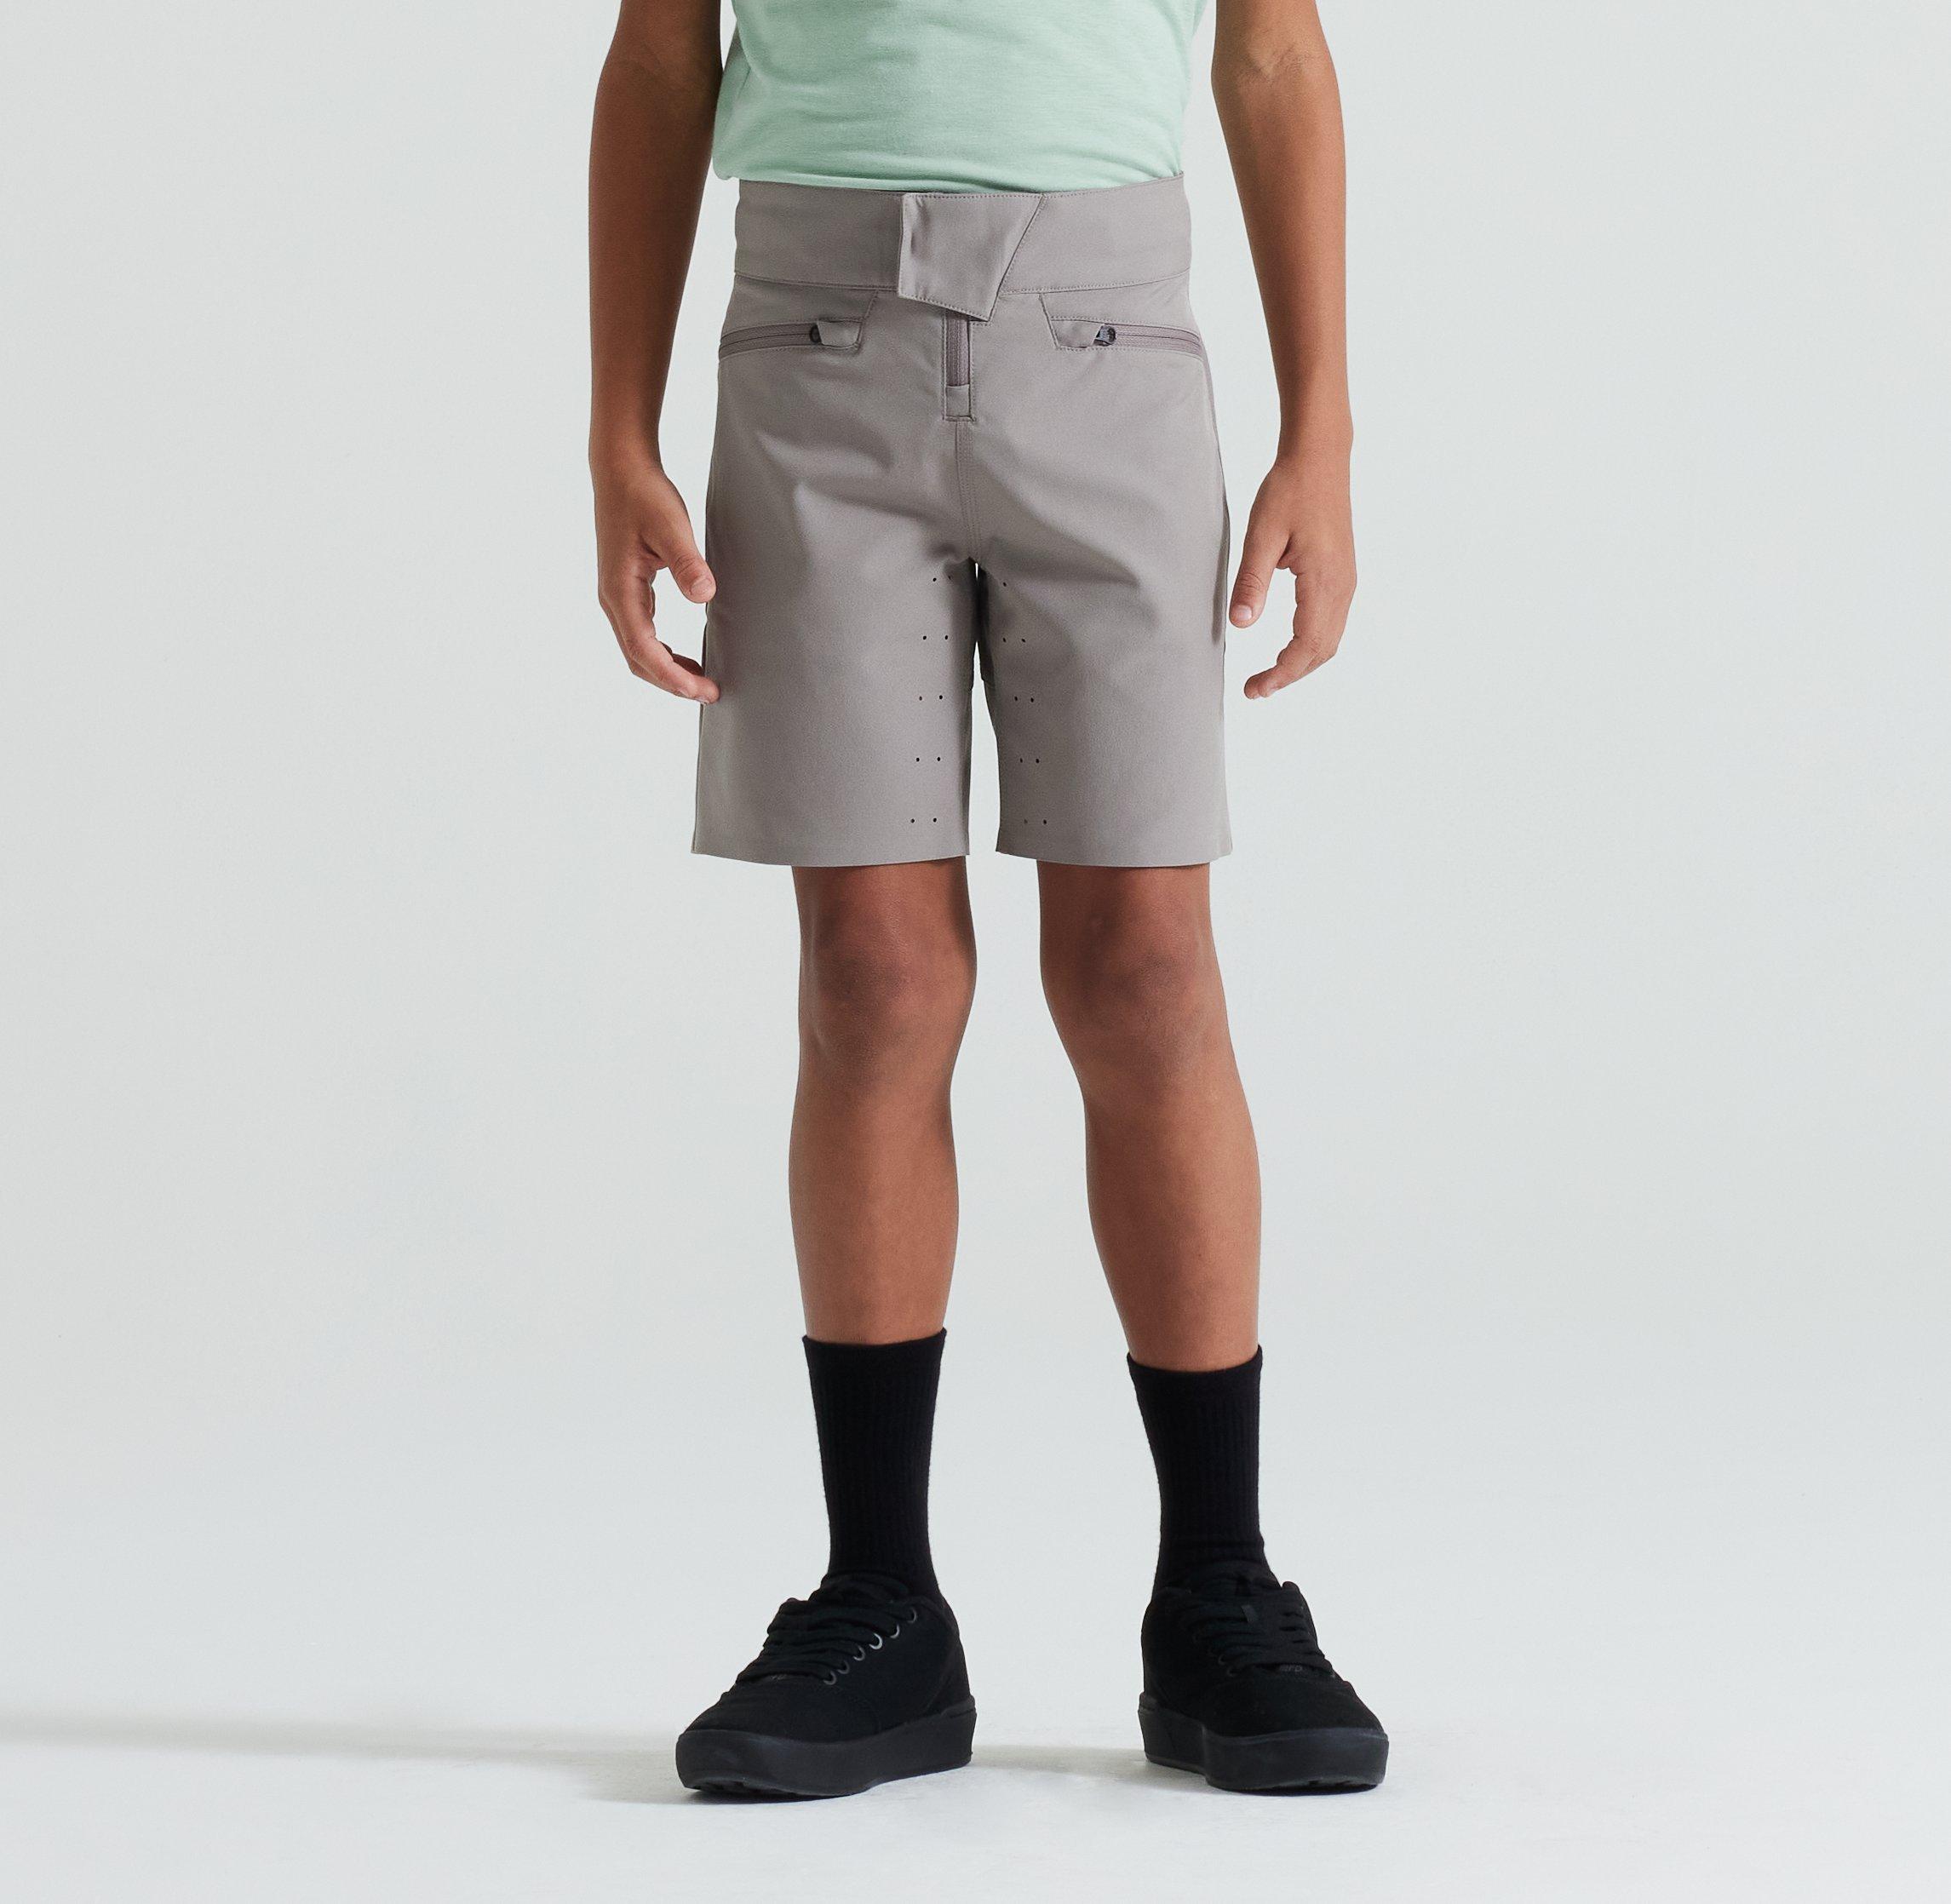 Youth Trail Short